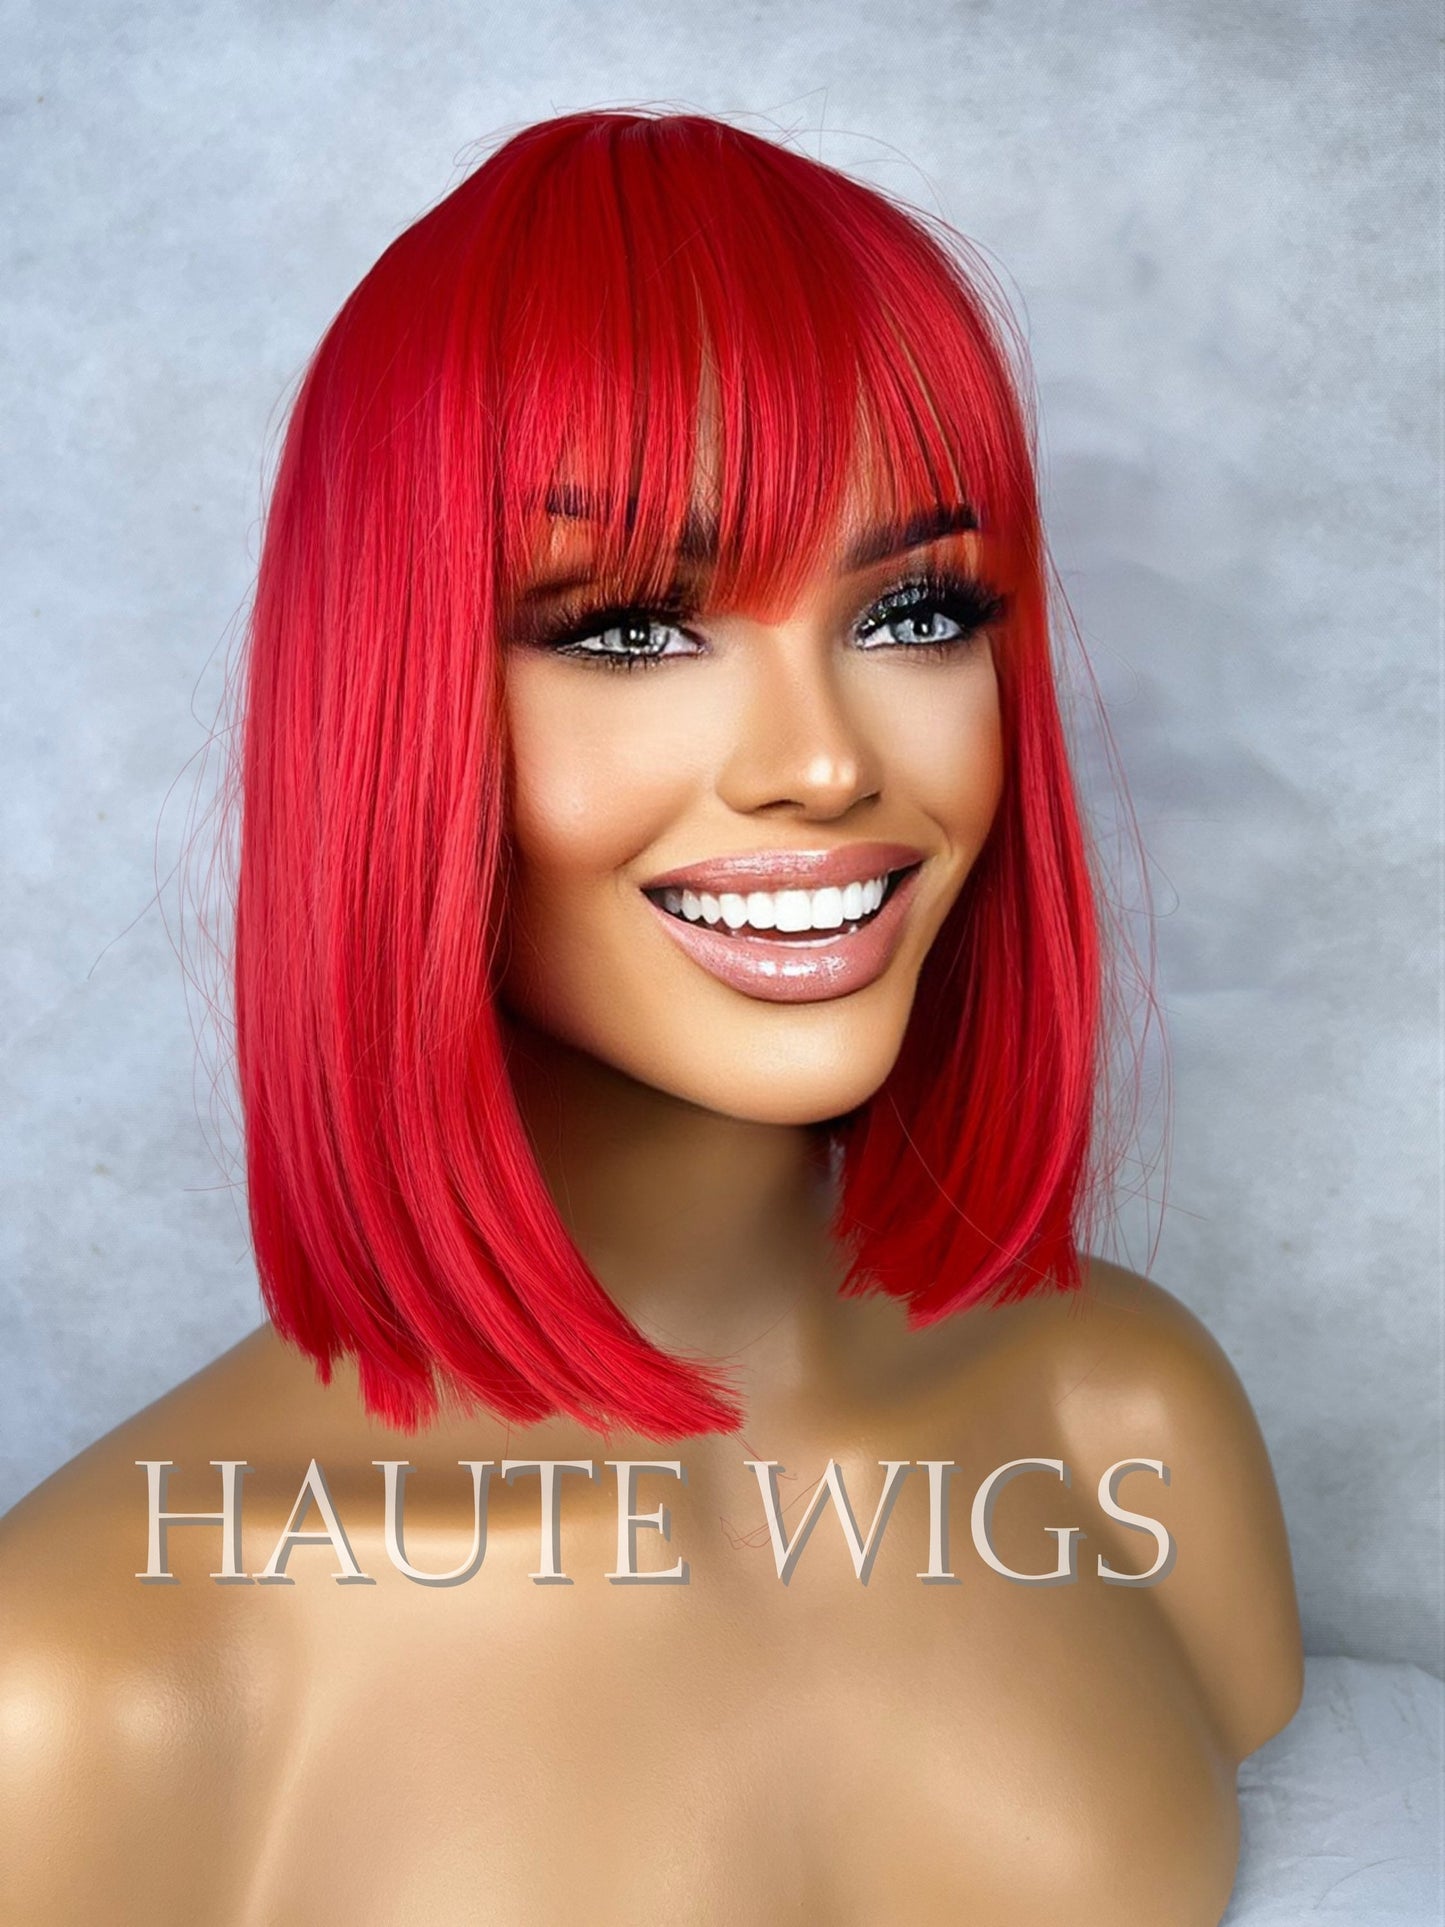 Sharp & Straight Short BOB Womens Wig 12 Inch Bright and Deep Red With Fringe Bangs Ladies Wigs Blunt Cut Haute Wigs Gift For Her